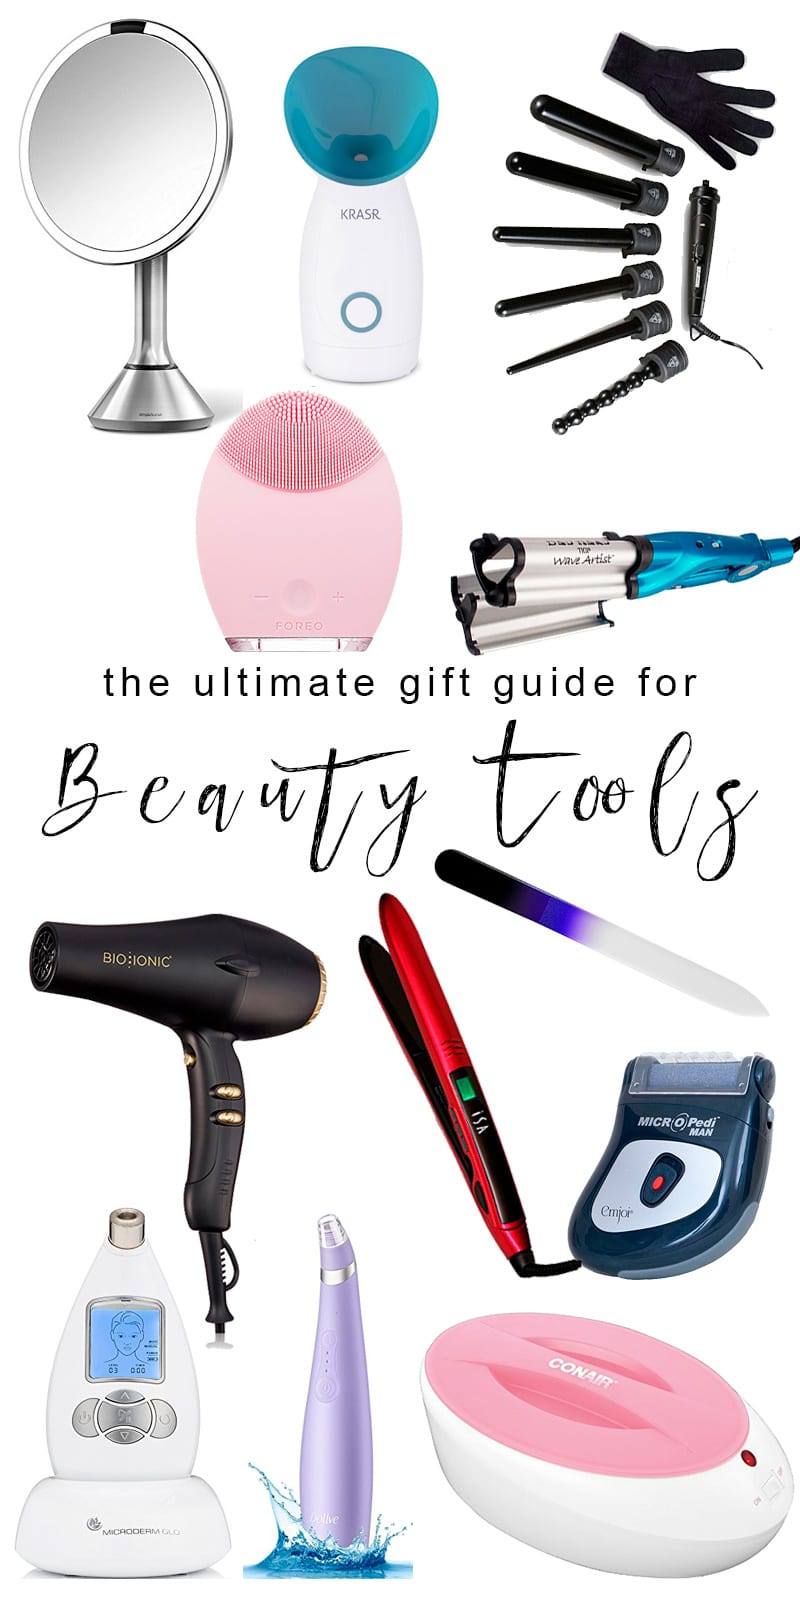 Beauty Tools Gift Guide - the ultimate beauty tools gift guide